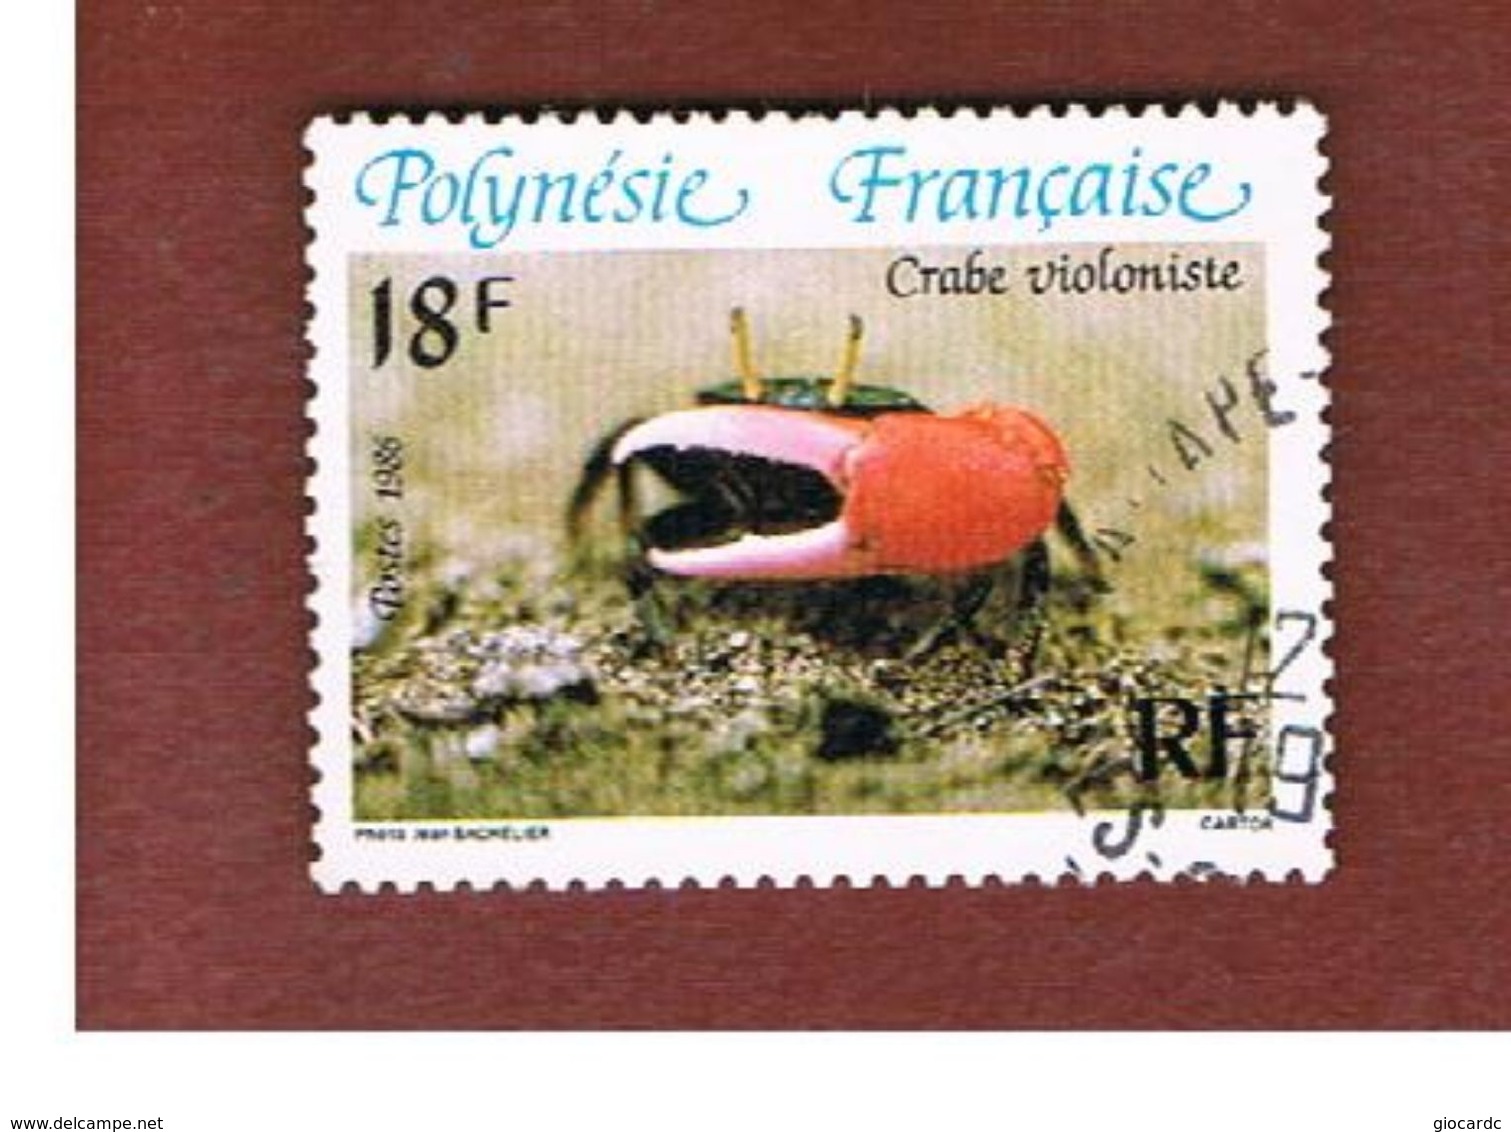 POLINESIA FRANCESE  (FRENCH POLYNESIA ) - SG 465  - 1986 CRABS: FIDDLER - USED° - Used Stamps